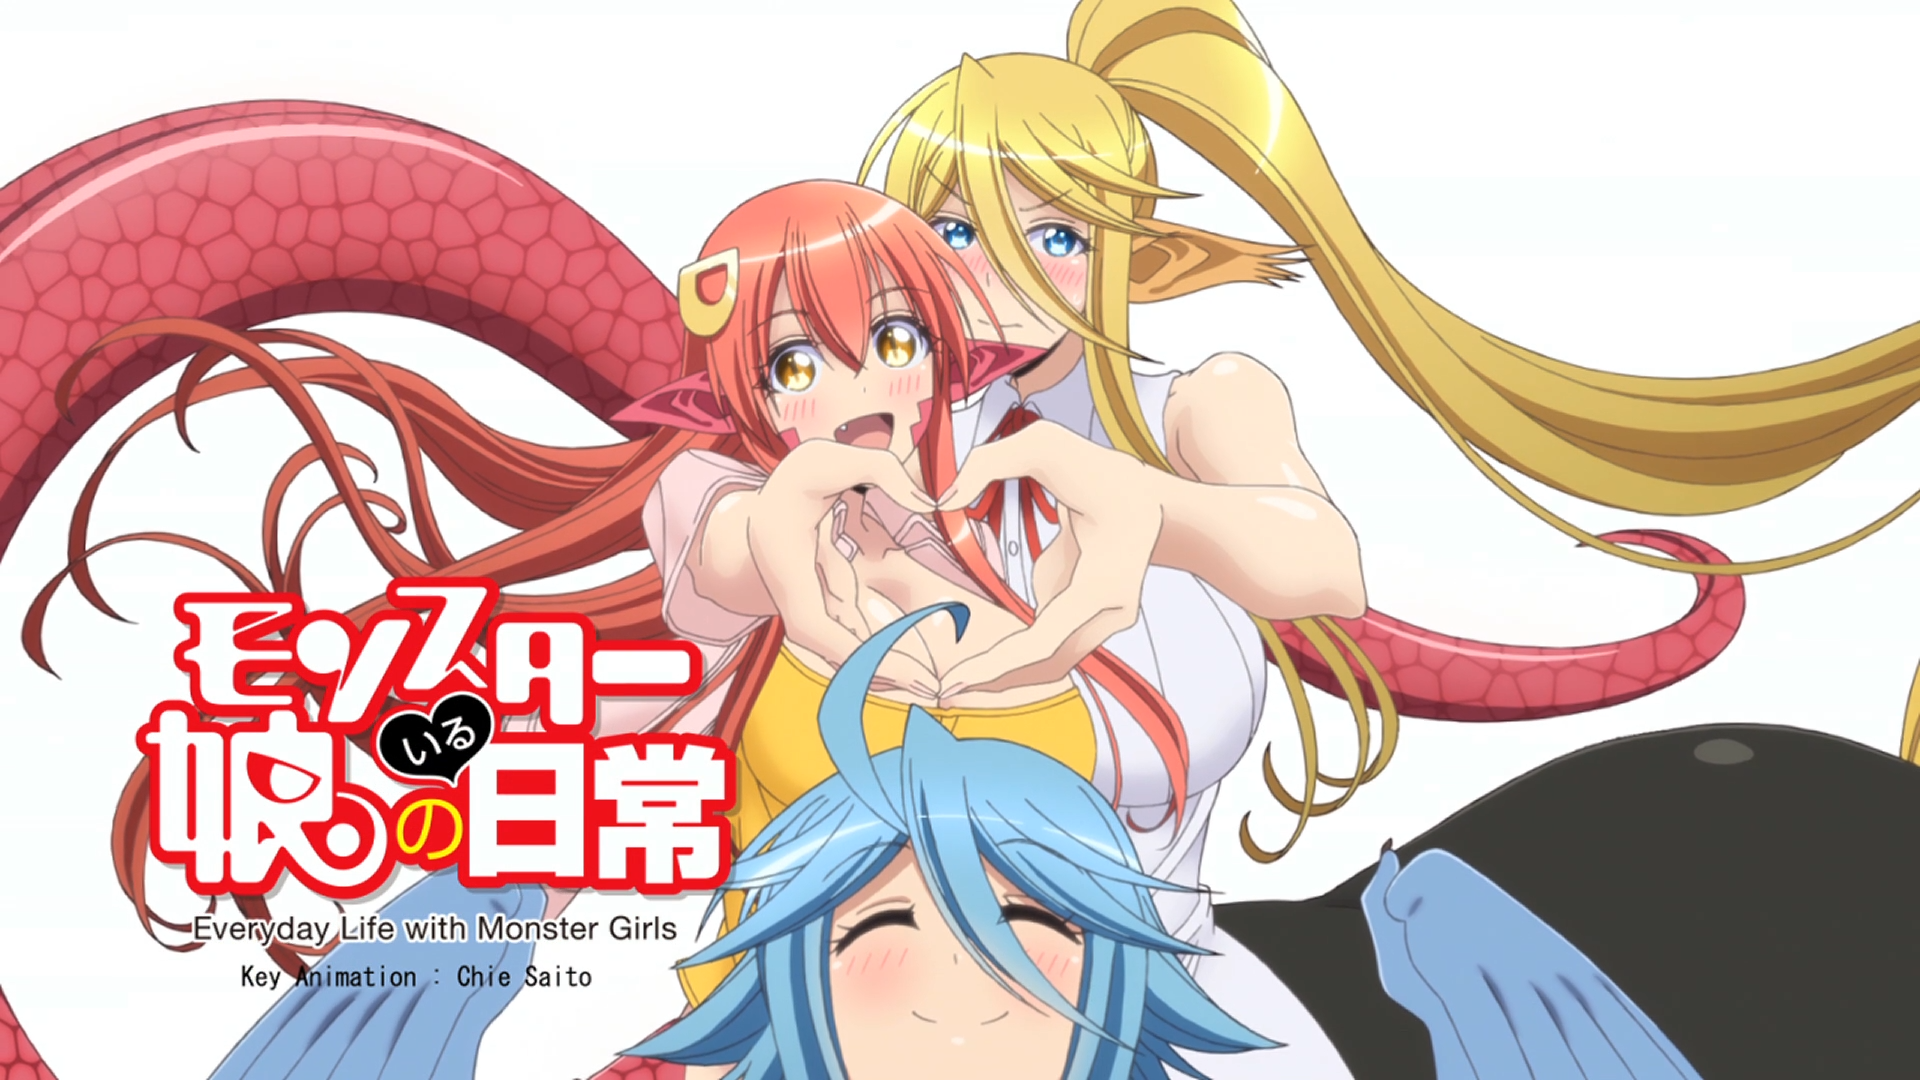 camila rondon recommends Monster Musume Episode 3